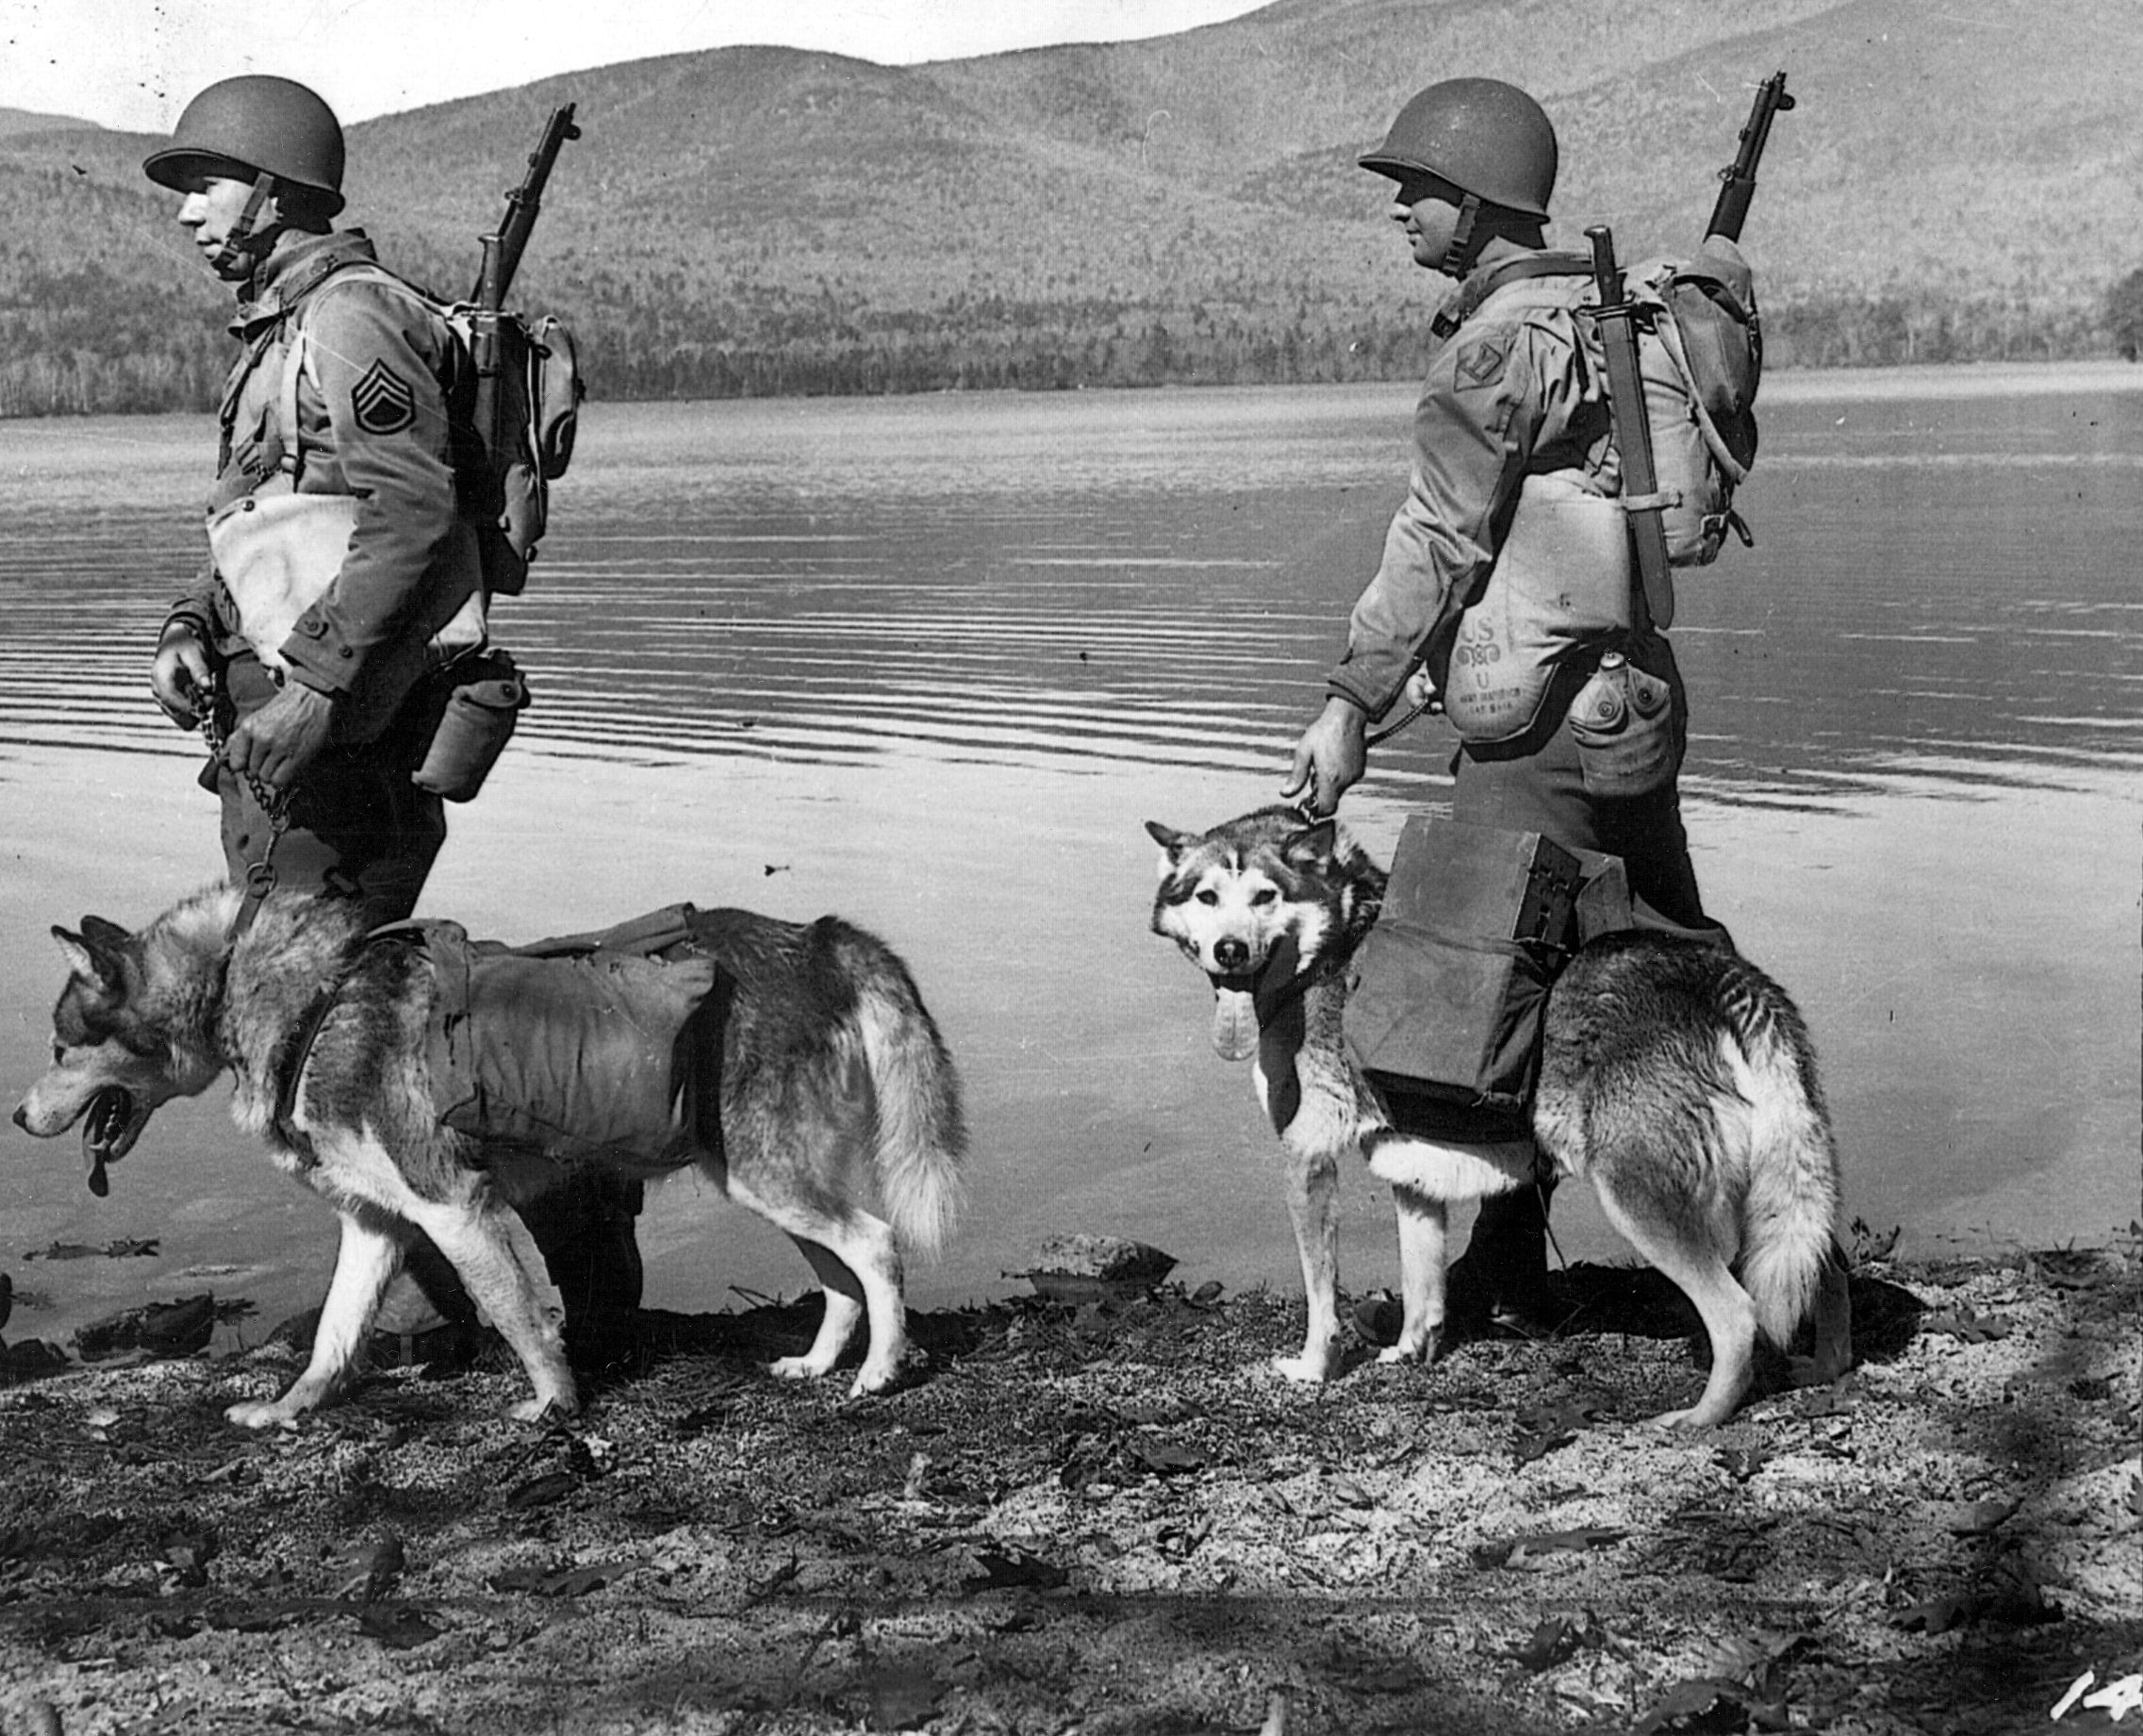 To toughen up the paratrooper dogs, Army trainers (these two are with the 26th Infantry Division) take them on a 75-mile hike. By the time they are done, the dogs are in fine fettle and ready to jump.